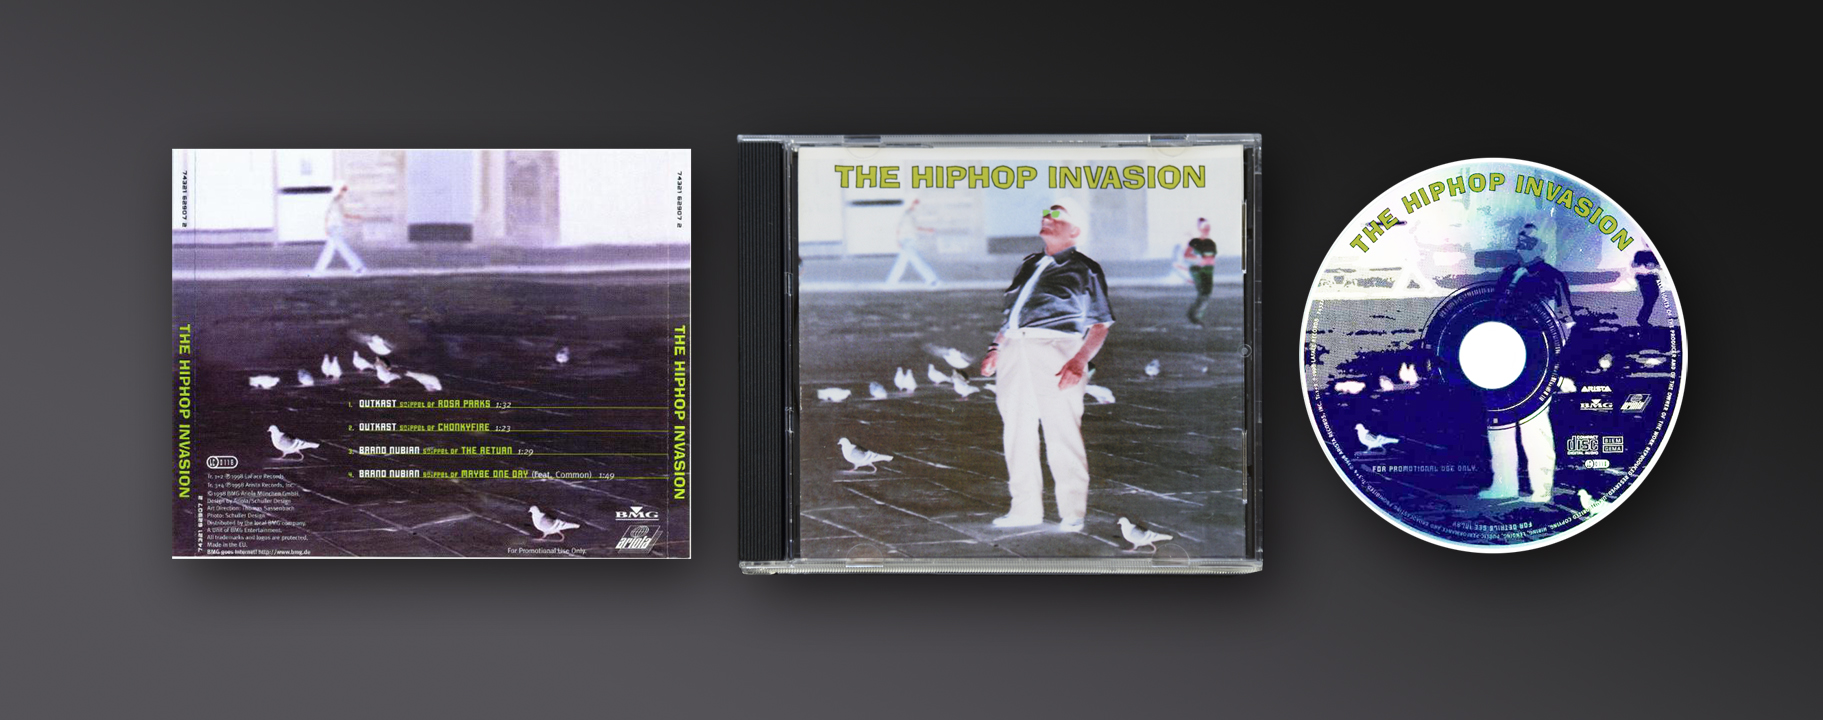 print | BMG ARIOLA | OutKast Brand Nubian | CD The Hiphop Invasion